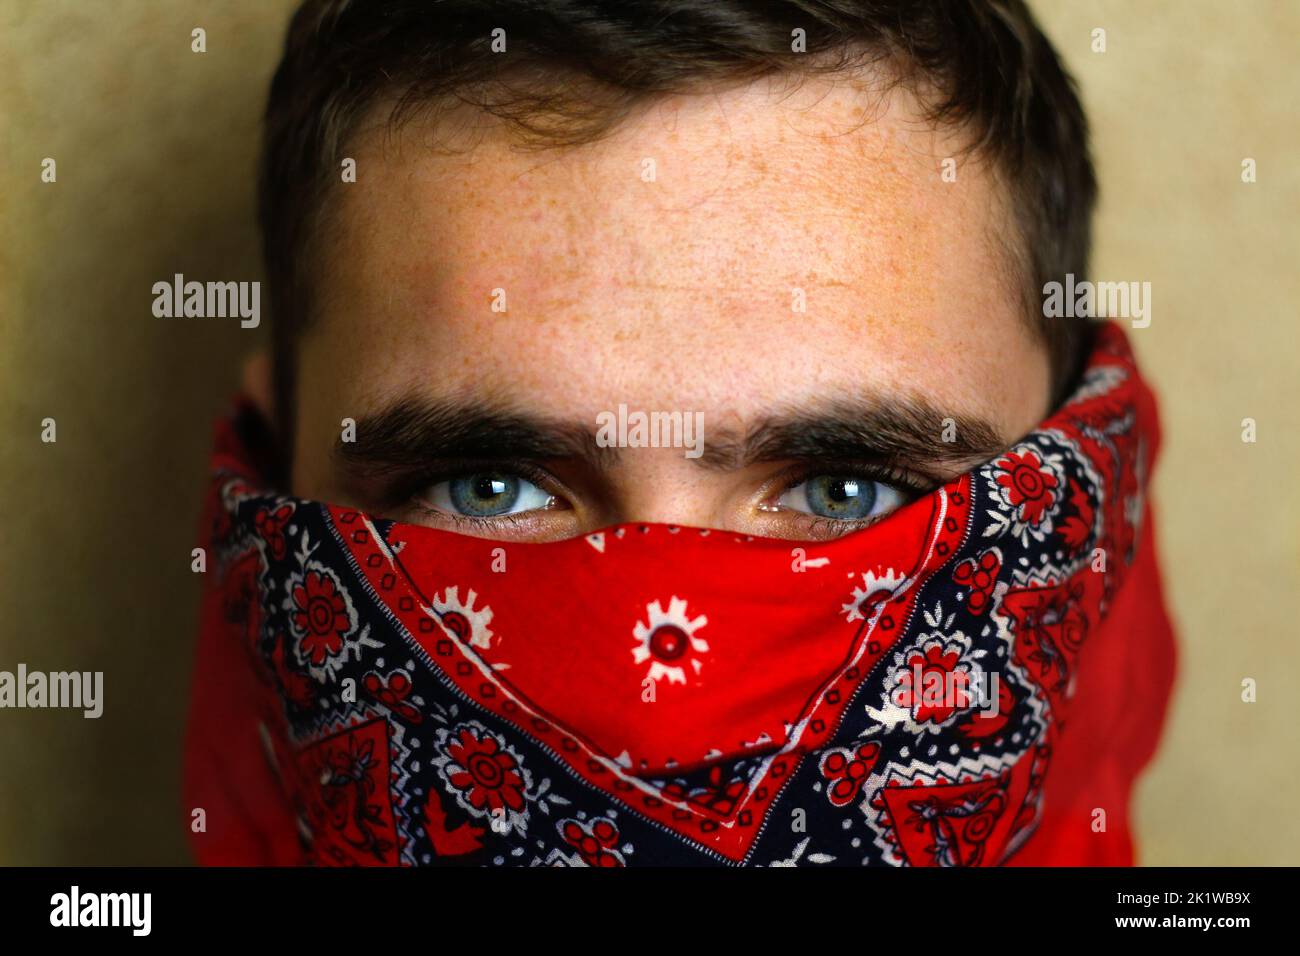 Defocus young man in red bandana. Closeup blue dark eyes. Man with his face hidden behind a bandanna stares balefully at the camera. Out of focus. Stock Photo